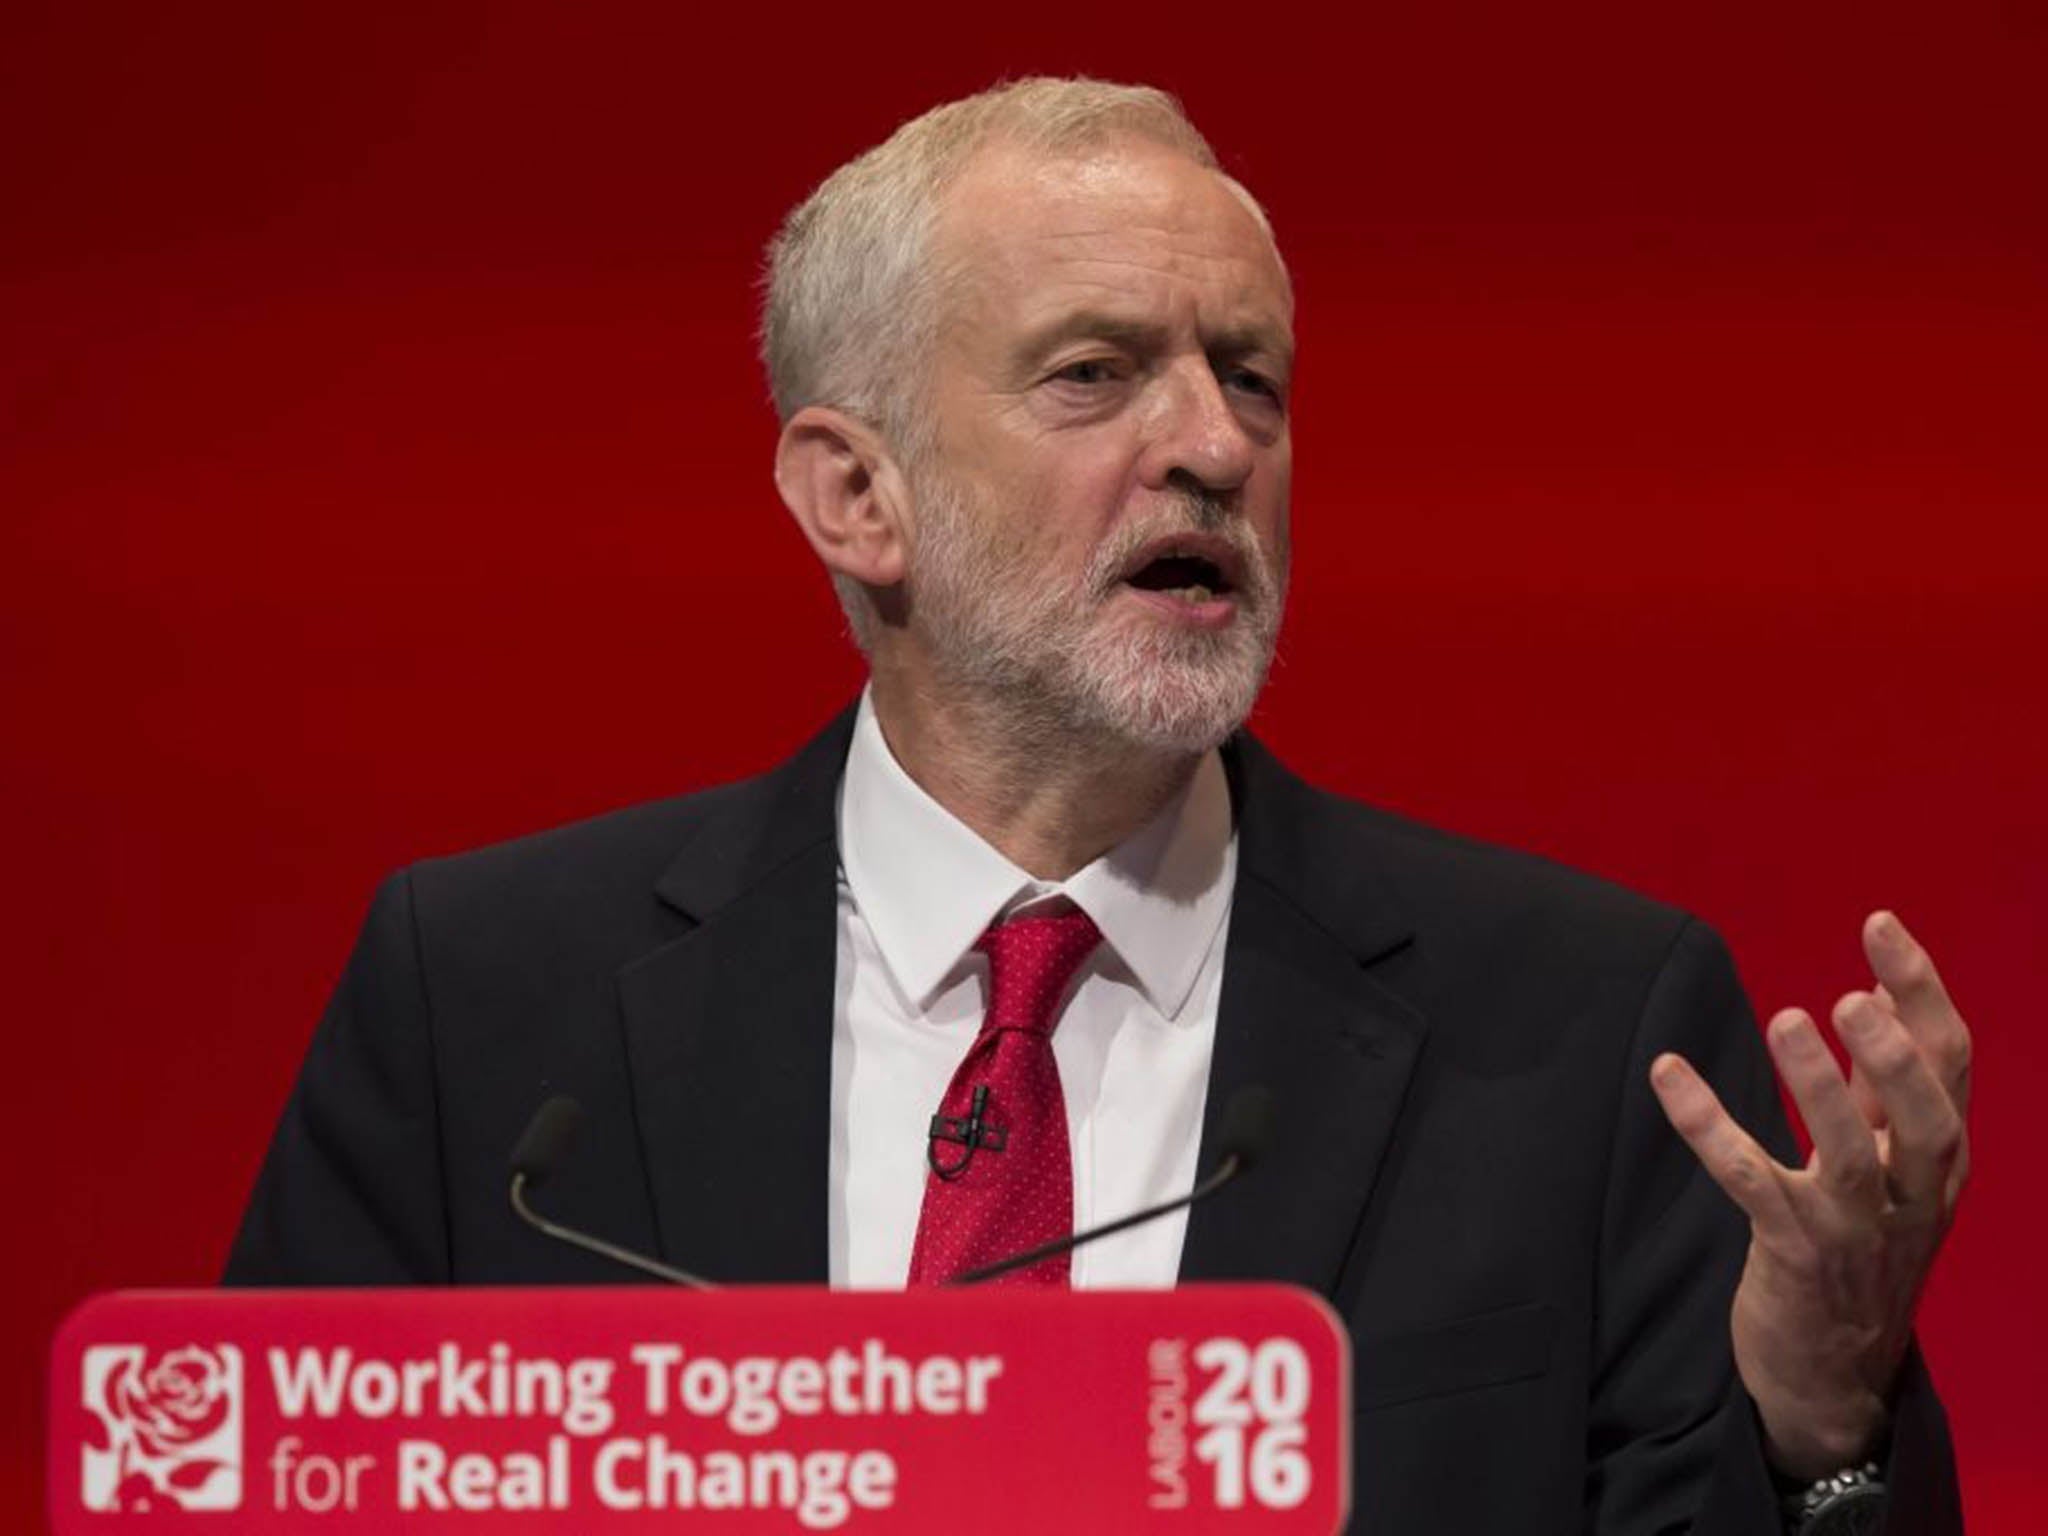 The Labour leader hit out at Donald Trump and Nigel Farage, saying they would do nothing to help those seeking ‘real control’